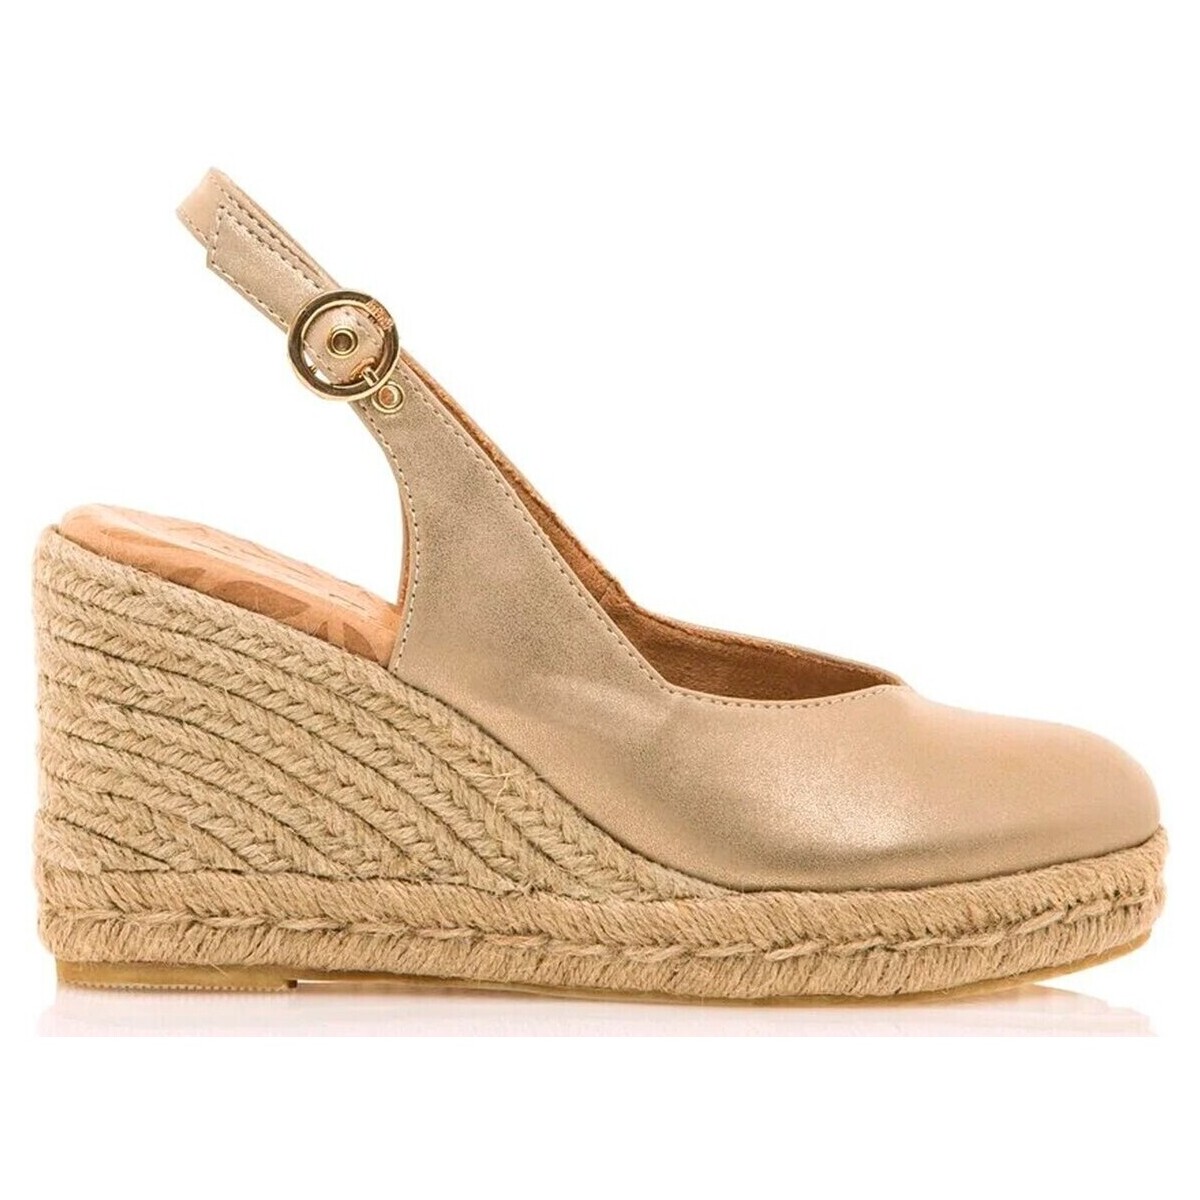 Chaussures Femme Espadrilles MTNG 32588 ORO